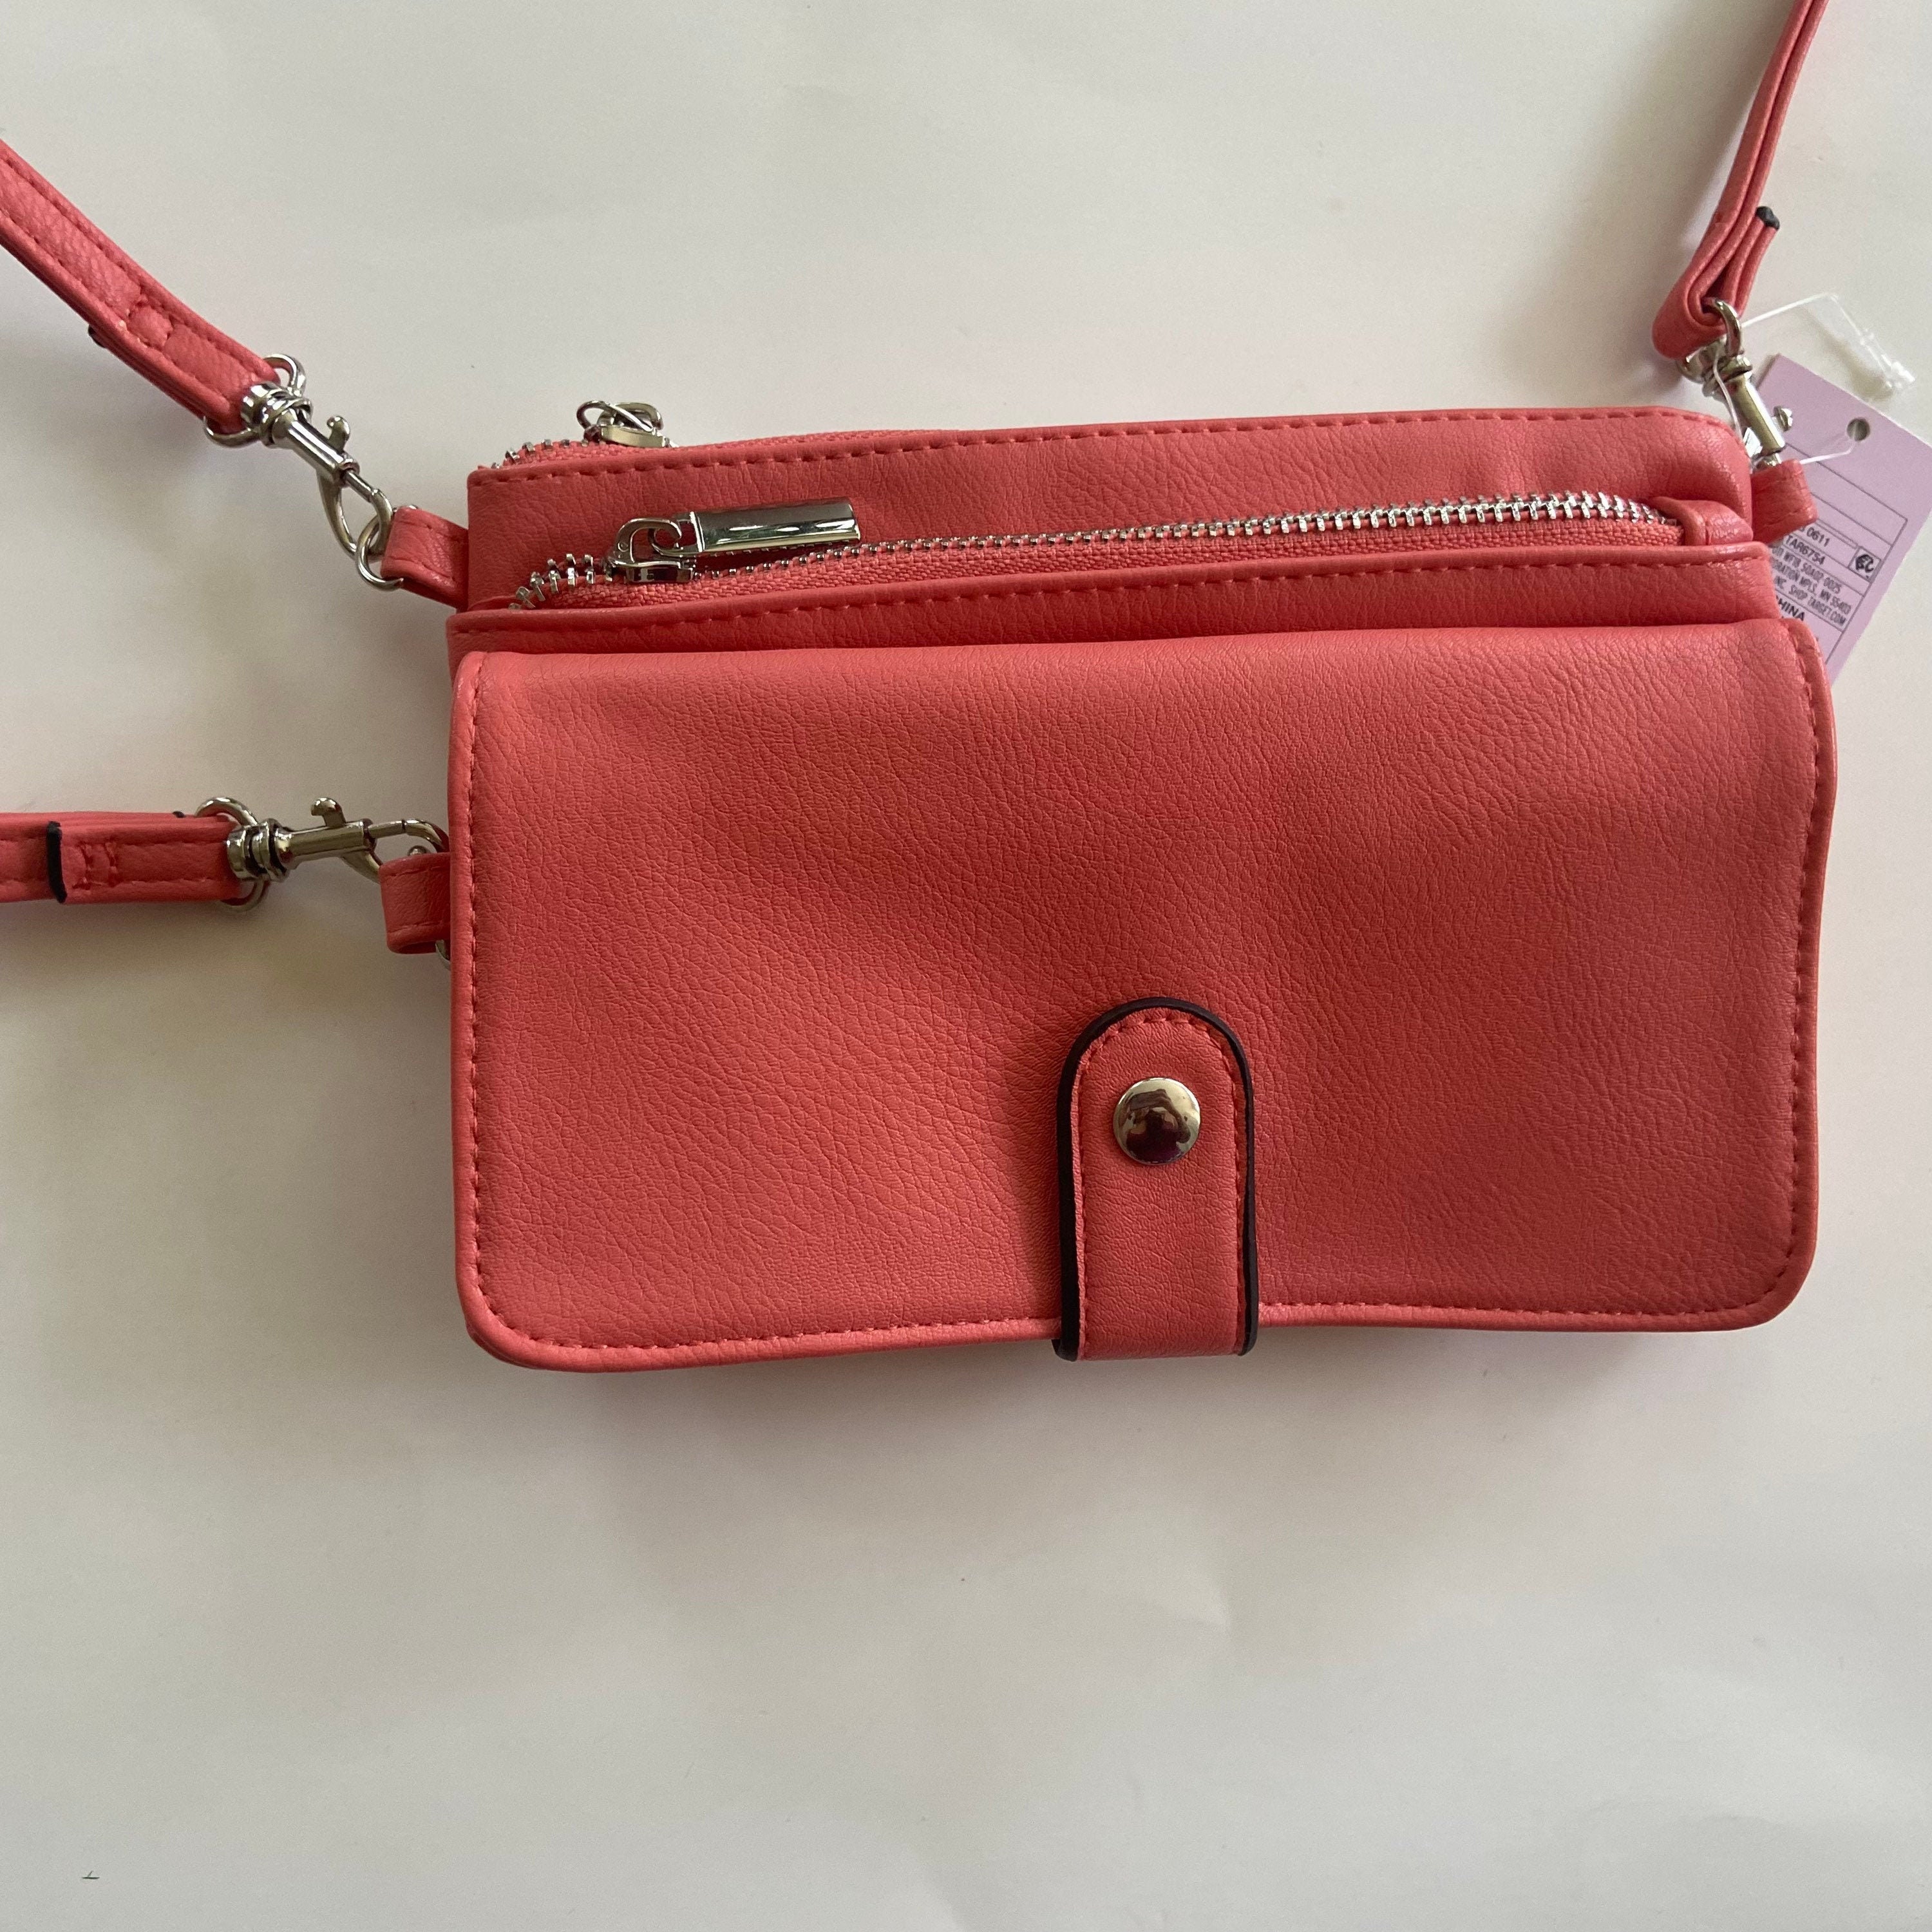 Neon pink purse from Target - $20! | Pink purse, Purses, Bag accessories